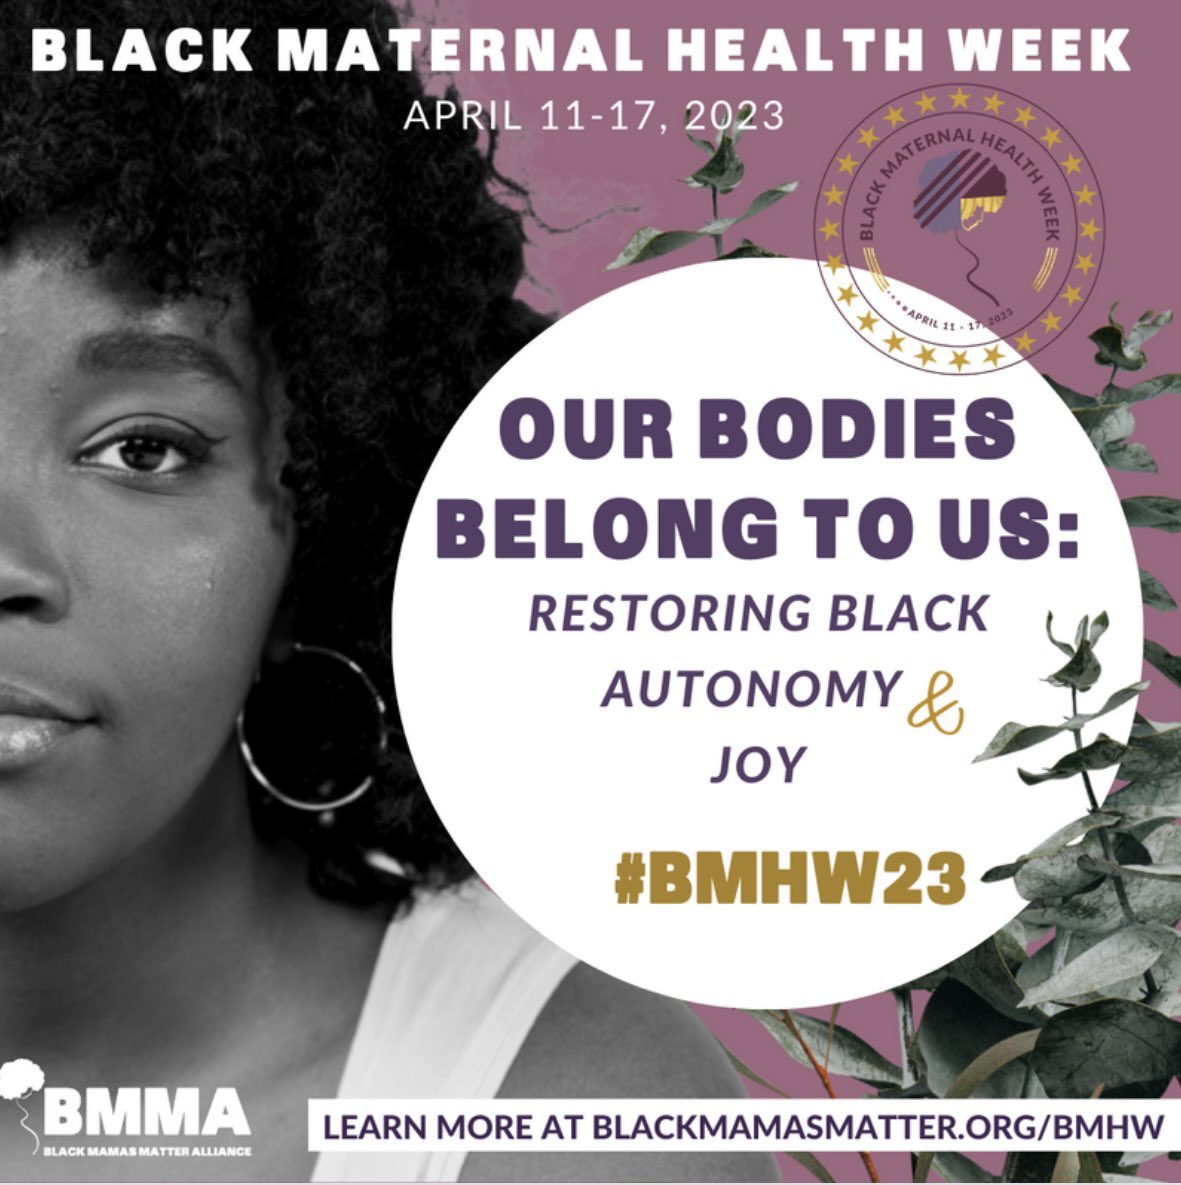 Hey #BlackMamas it’s Black Maternal Health Week: “Our Bodies Belong to Us: Restoring Black Autonomy and Joy”

Join #HealthyStartPGH at events happening across the region this week in honor of #BMHW23